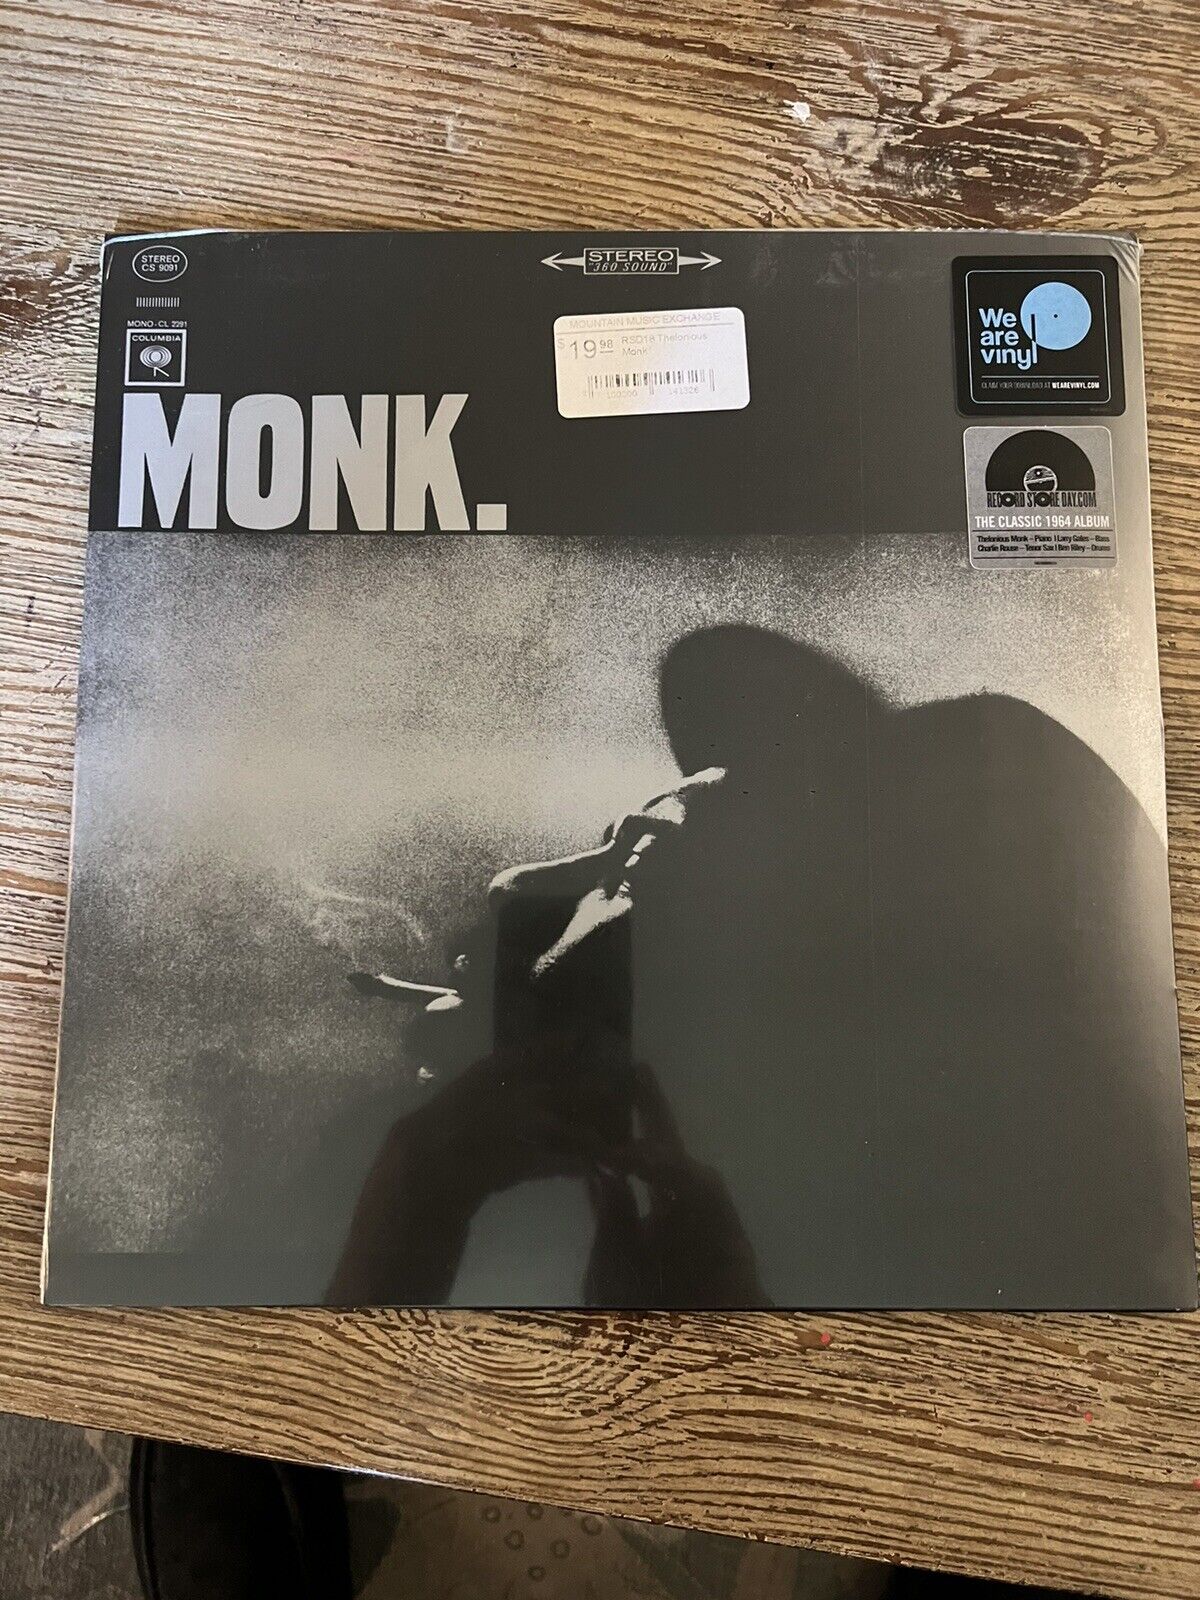 thelonious monk vinyl - Record Store day Release 2018